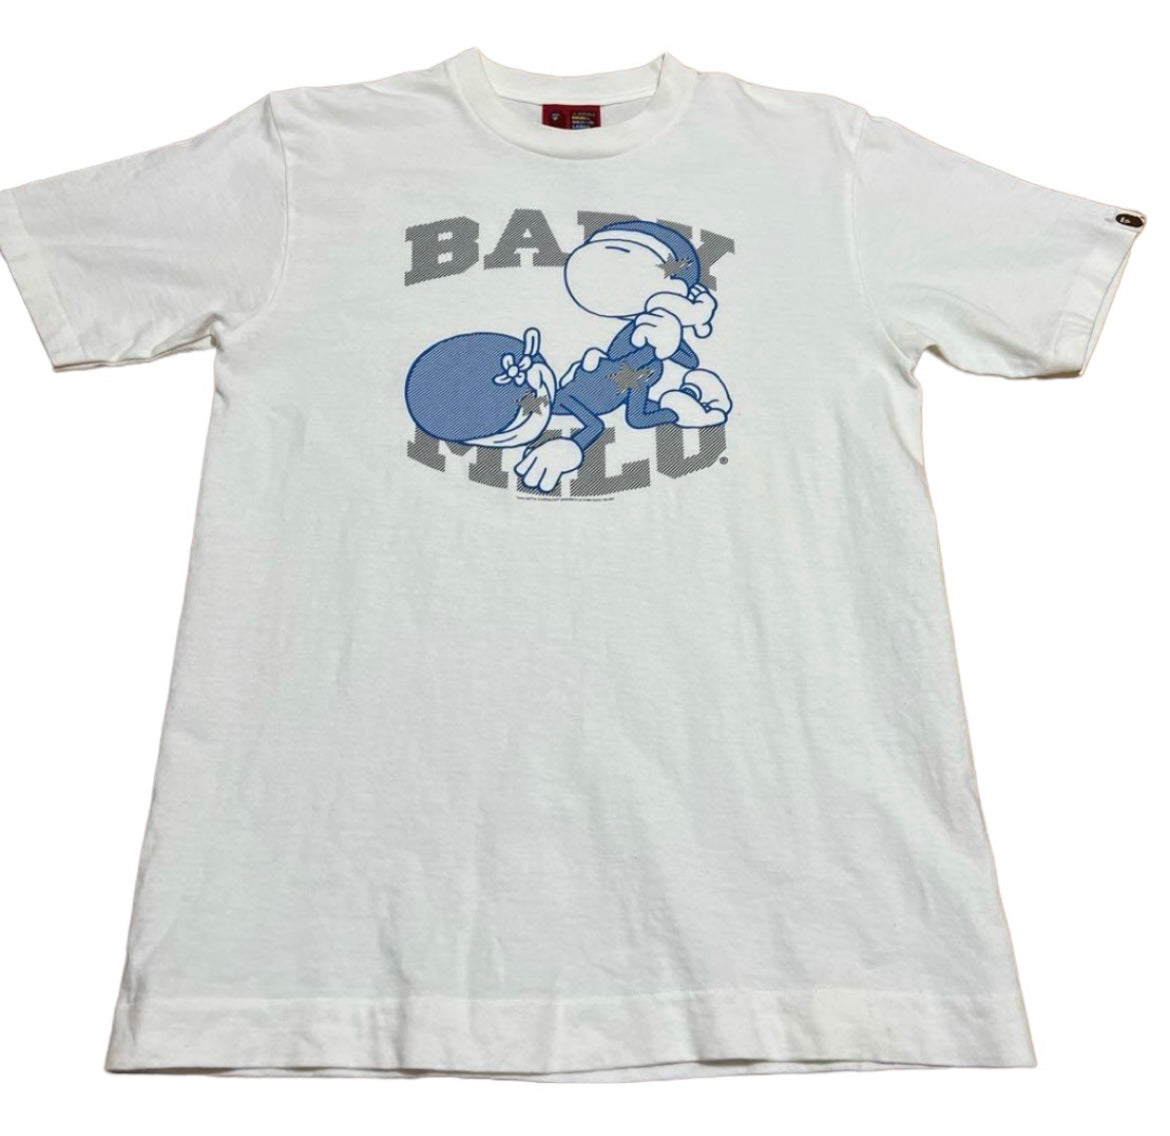 2006 Baby mill sex tee (Small)